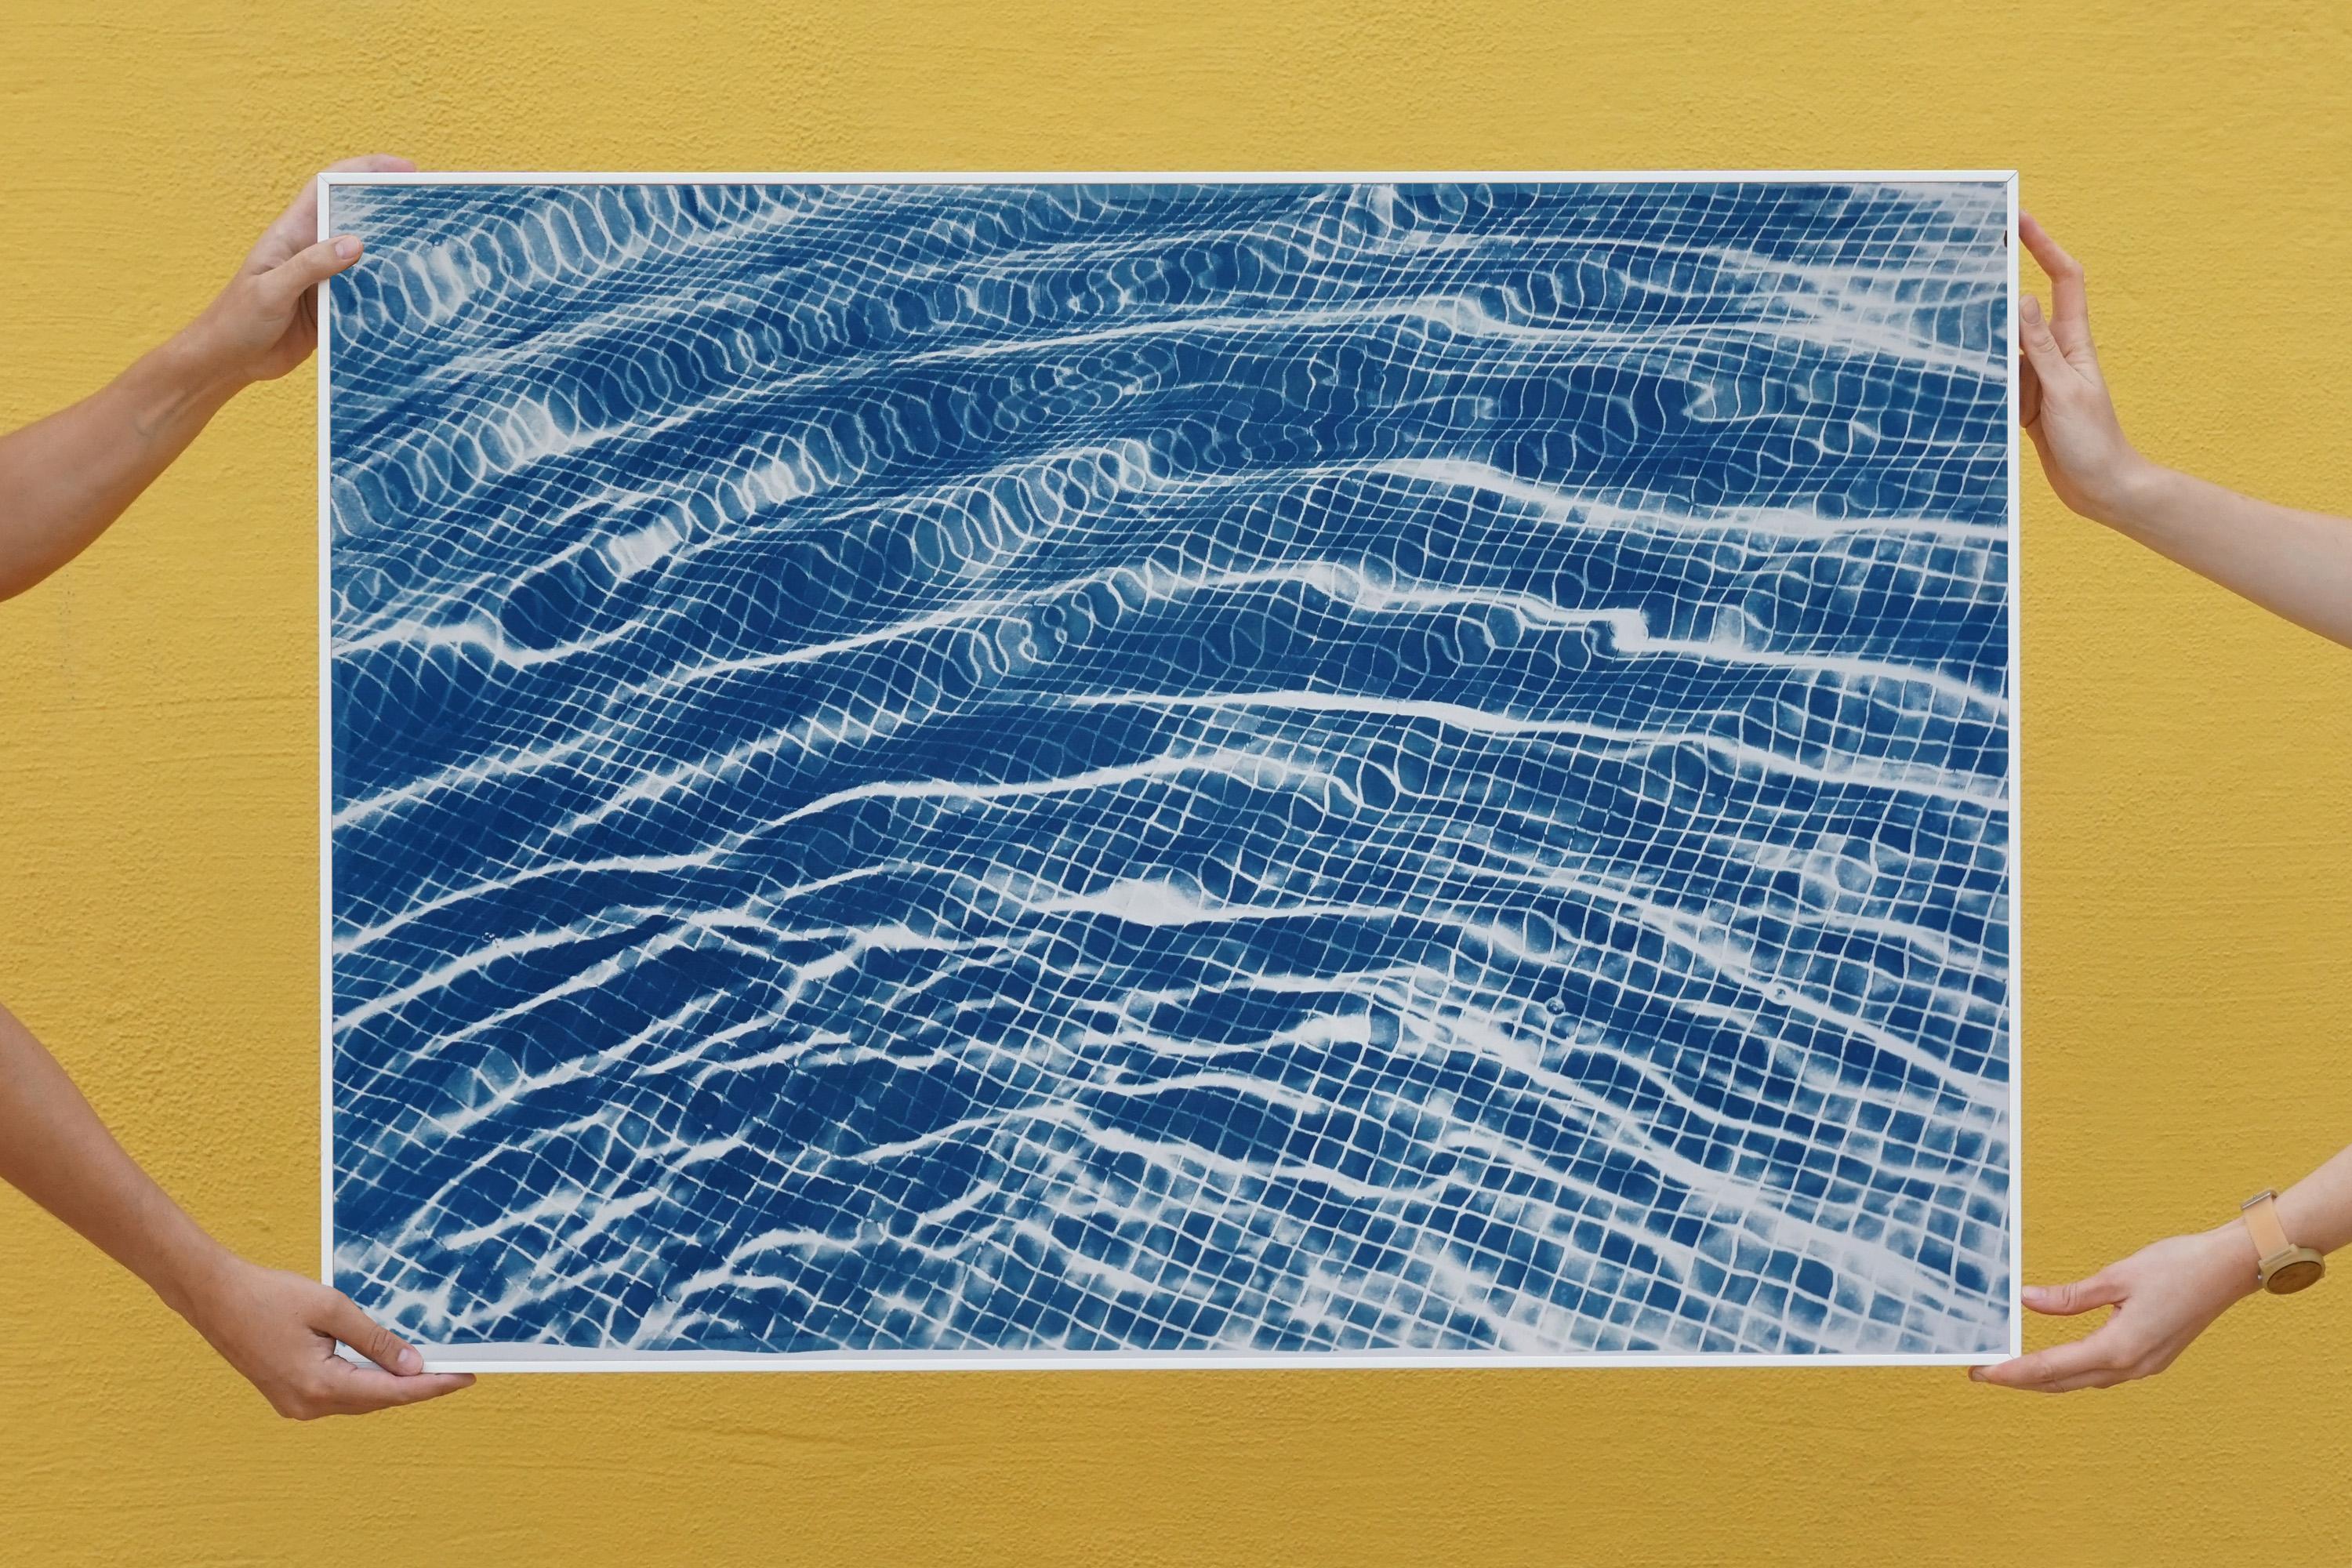 Miami Art Deco Pool, Blue Cyanotype on Paper, Abstract Shapes Water Reflections  - Print by Kind of Cyan